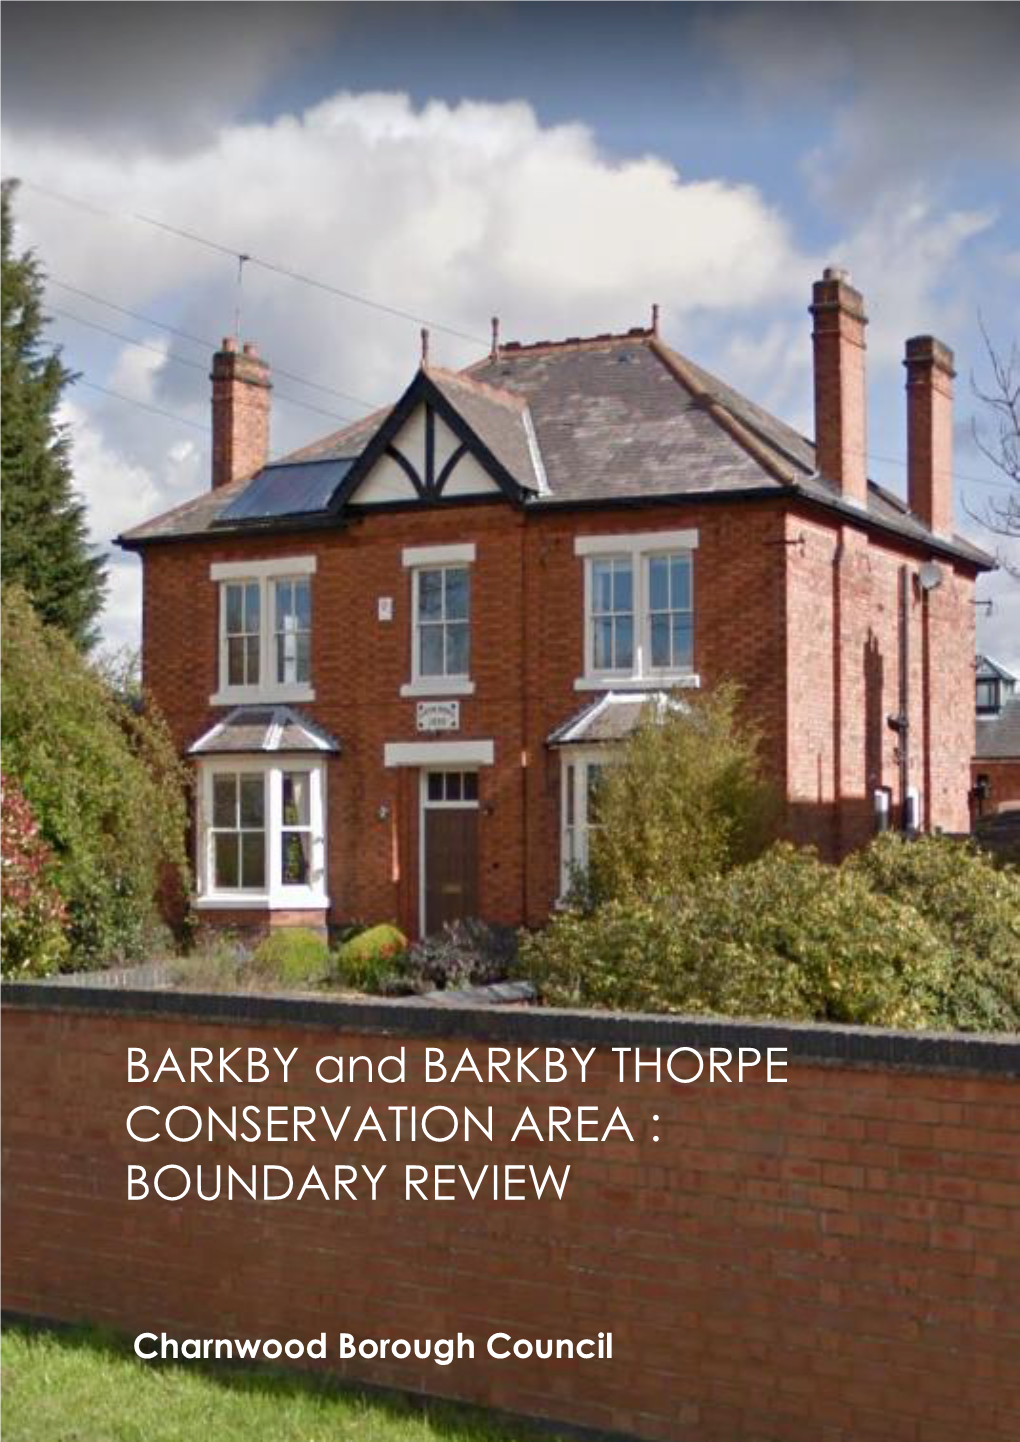 BARKBY and BARKBY THORPE CONSERVATION AREA : BOUNDARY REVIEW